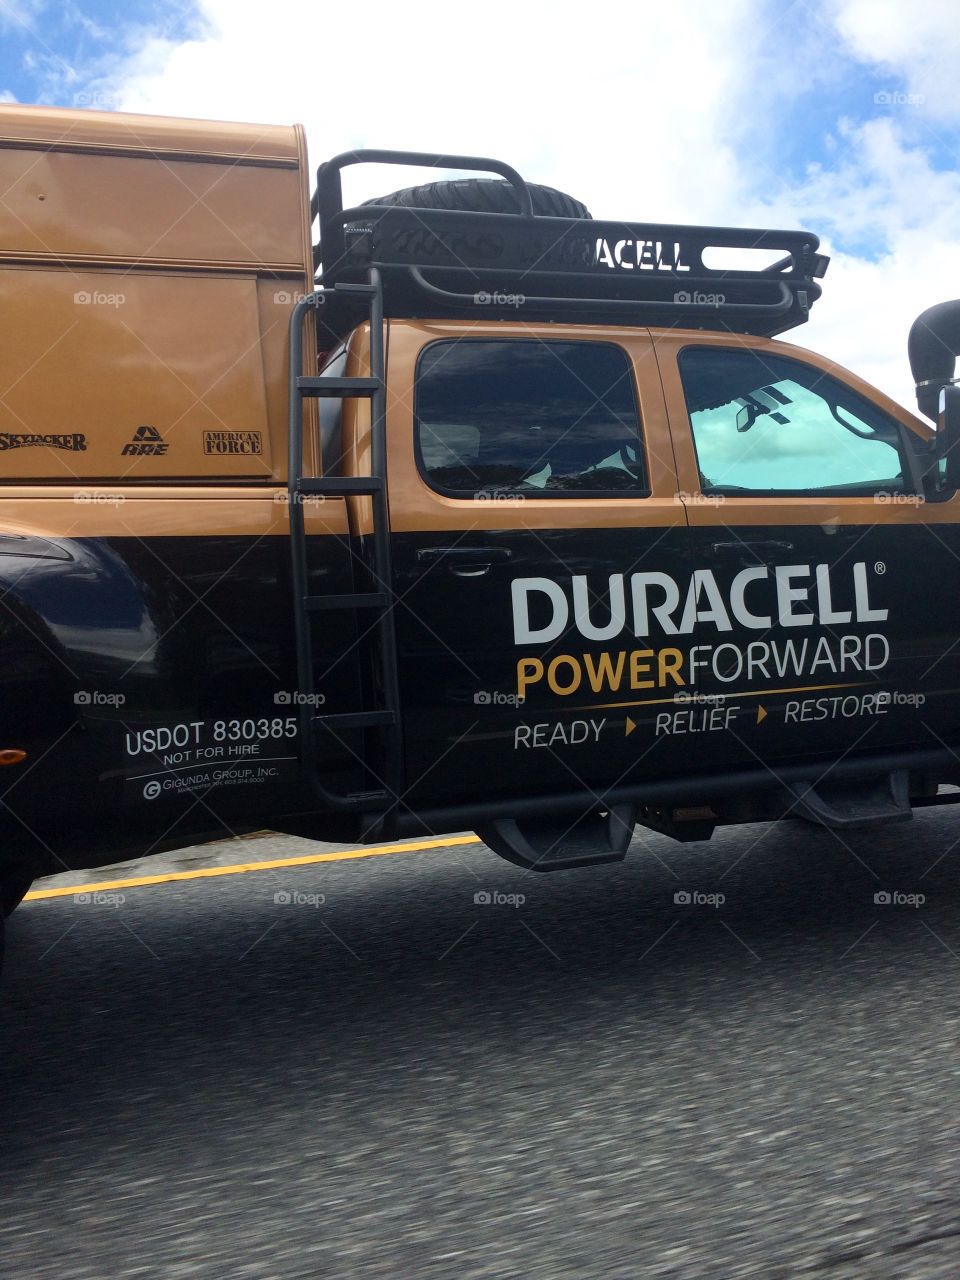 Power forward by Duracell 